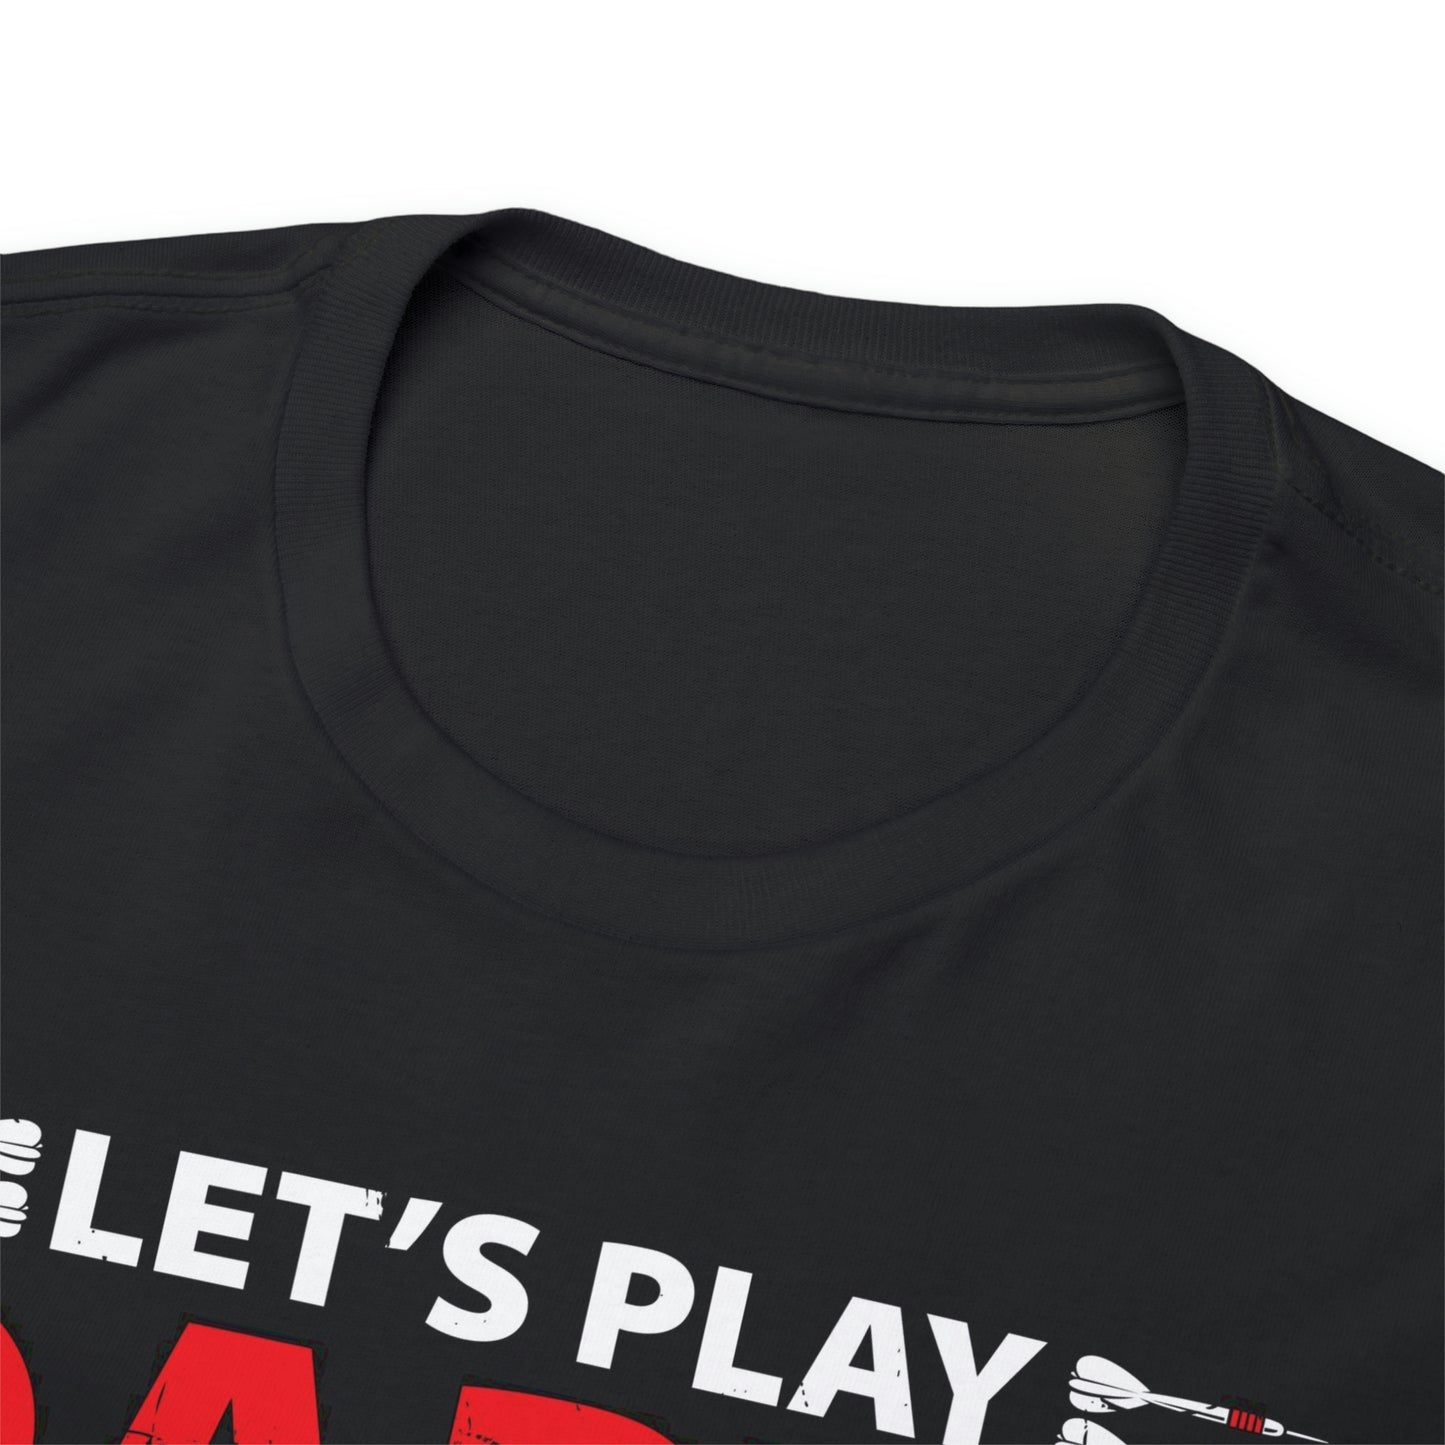 Let’s play darts bitches! - Unisex Heavy Cotton Tee